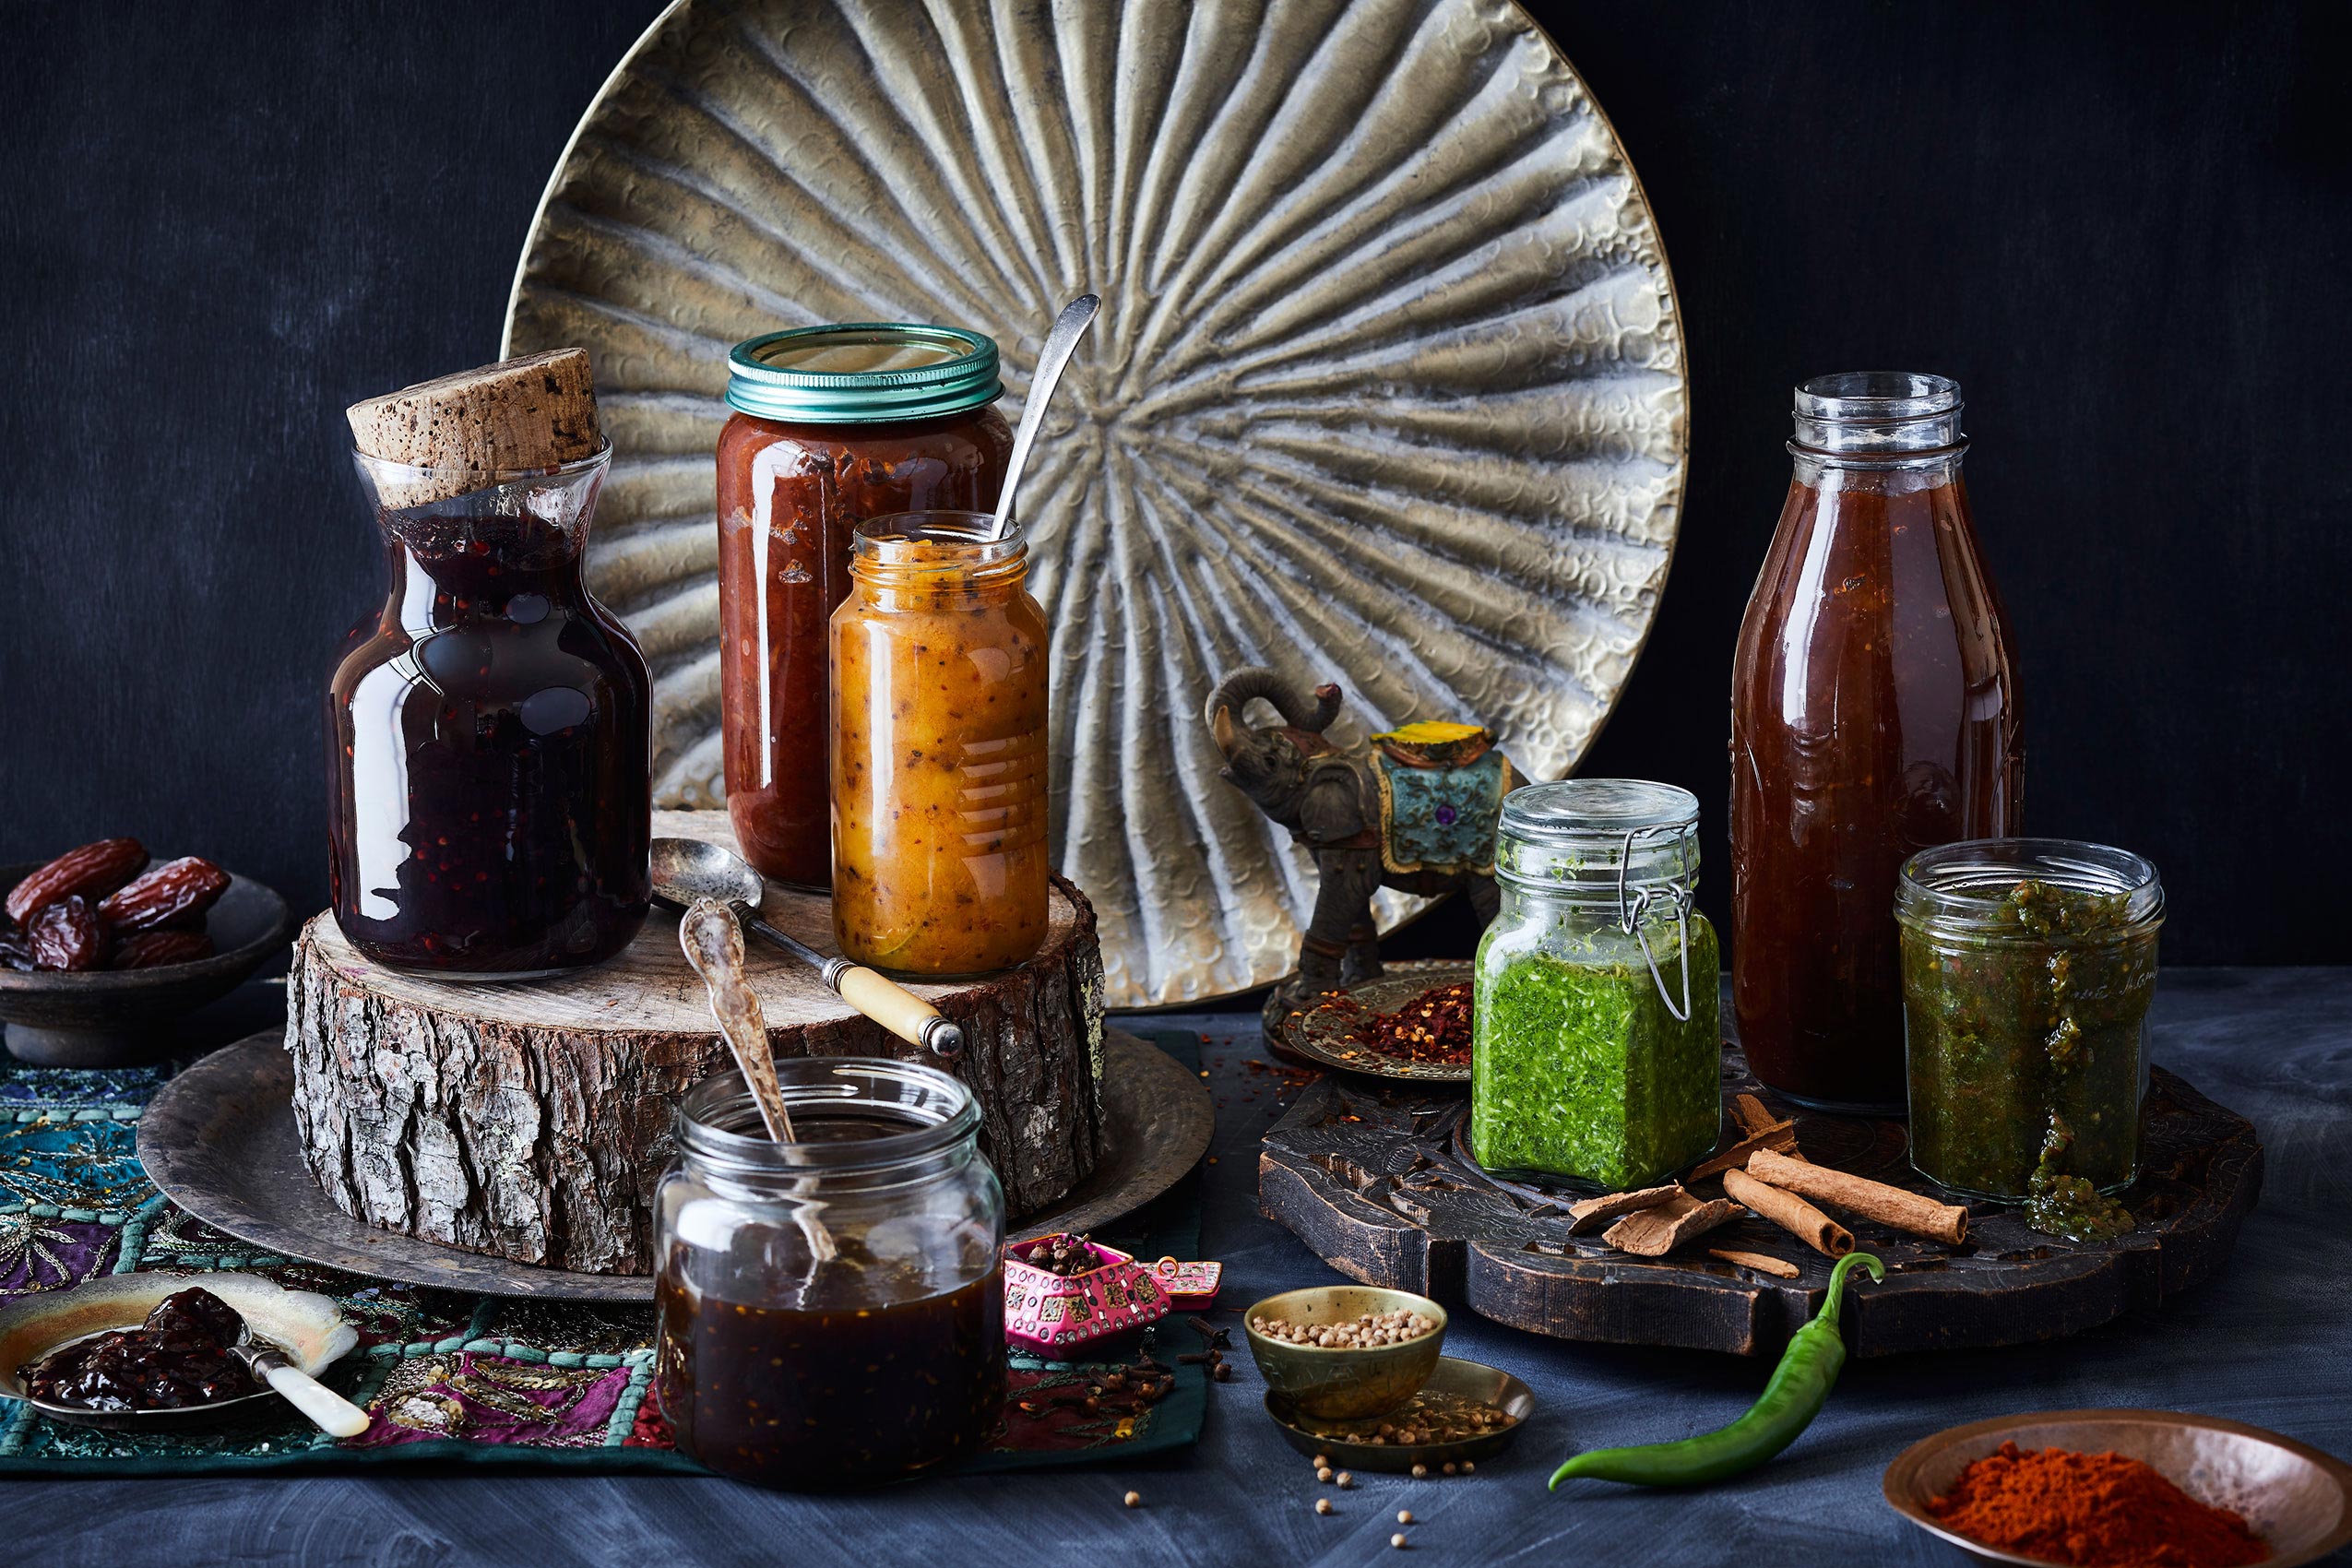 My Indian Kitchen • Colourful Home-Made Chutneys & Condiments • Cookbook & Editorial Food Photography